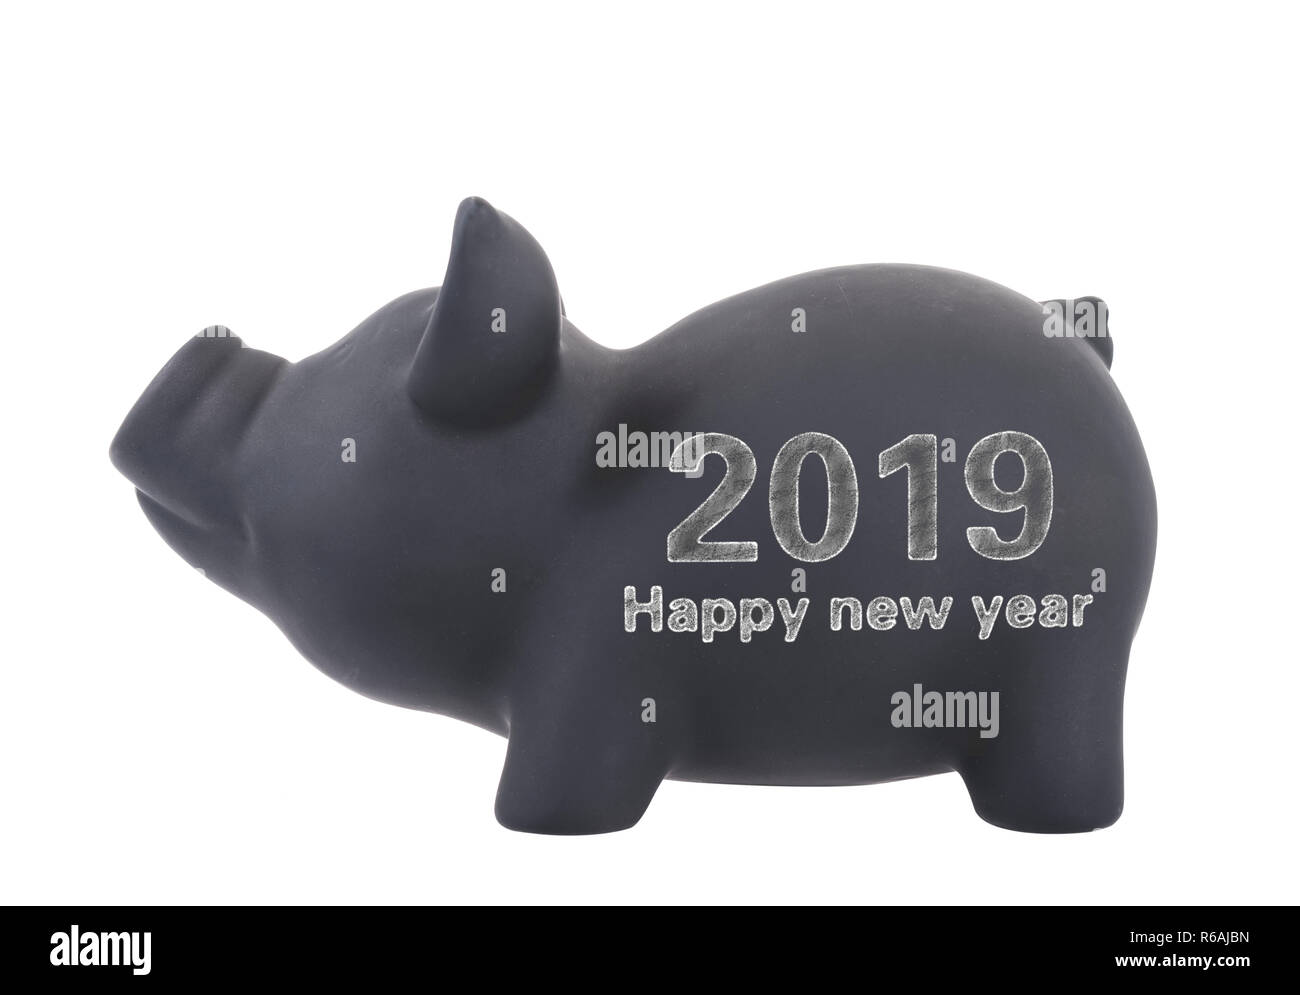 2019 is year of the pig,Word happy new year written with chalk on a black ceramic piggy bank coin container isolated on white background Stock Photo